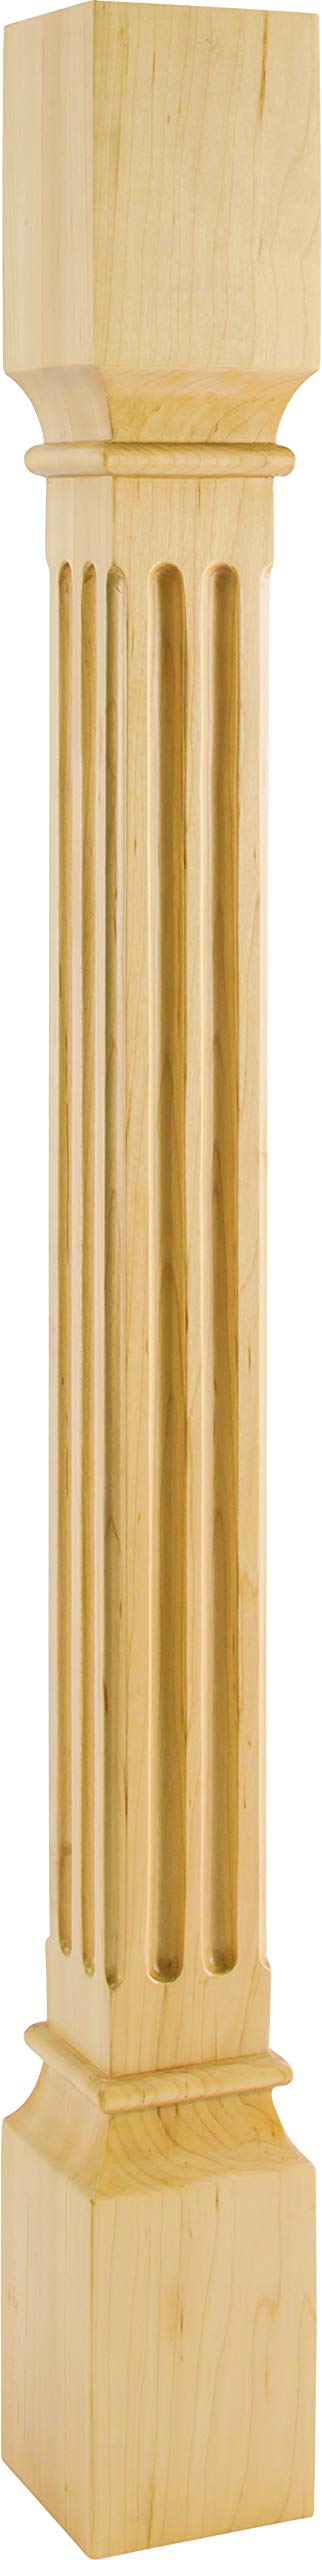 Hardware Resources P23-5-42-WB 5" W x 5" D x 42" H White Birch Fluted Acanthus Post